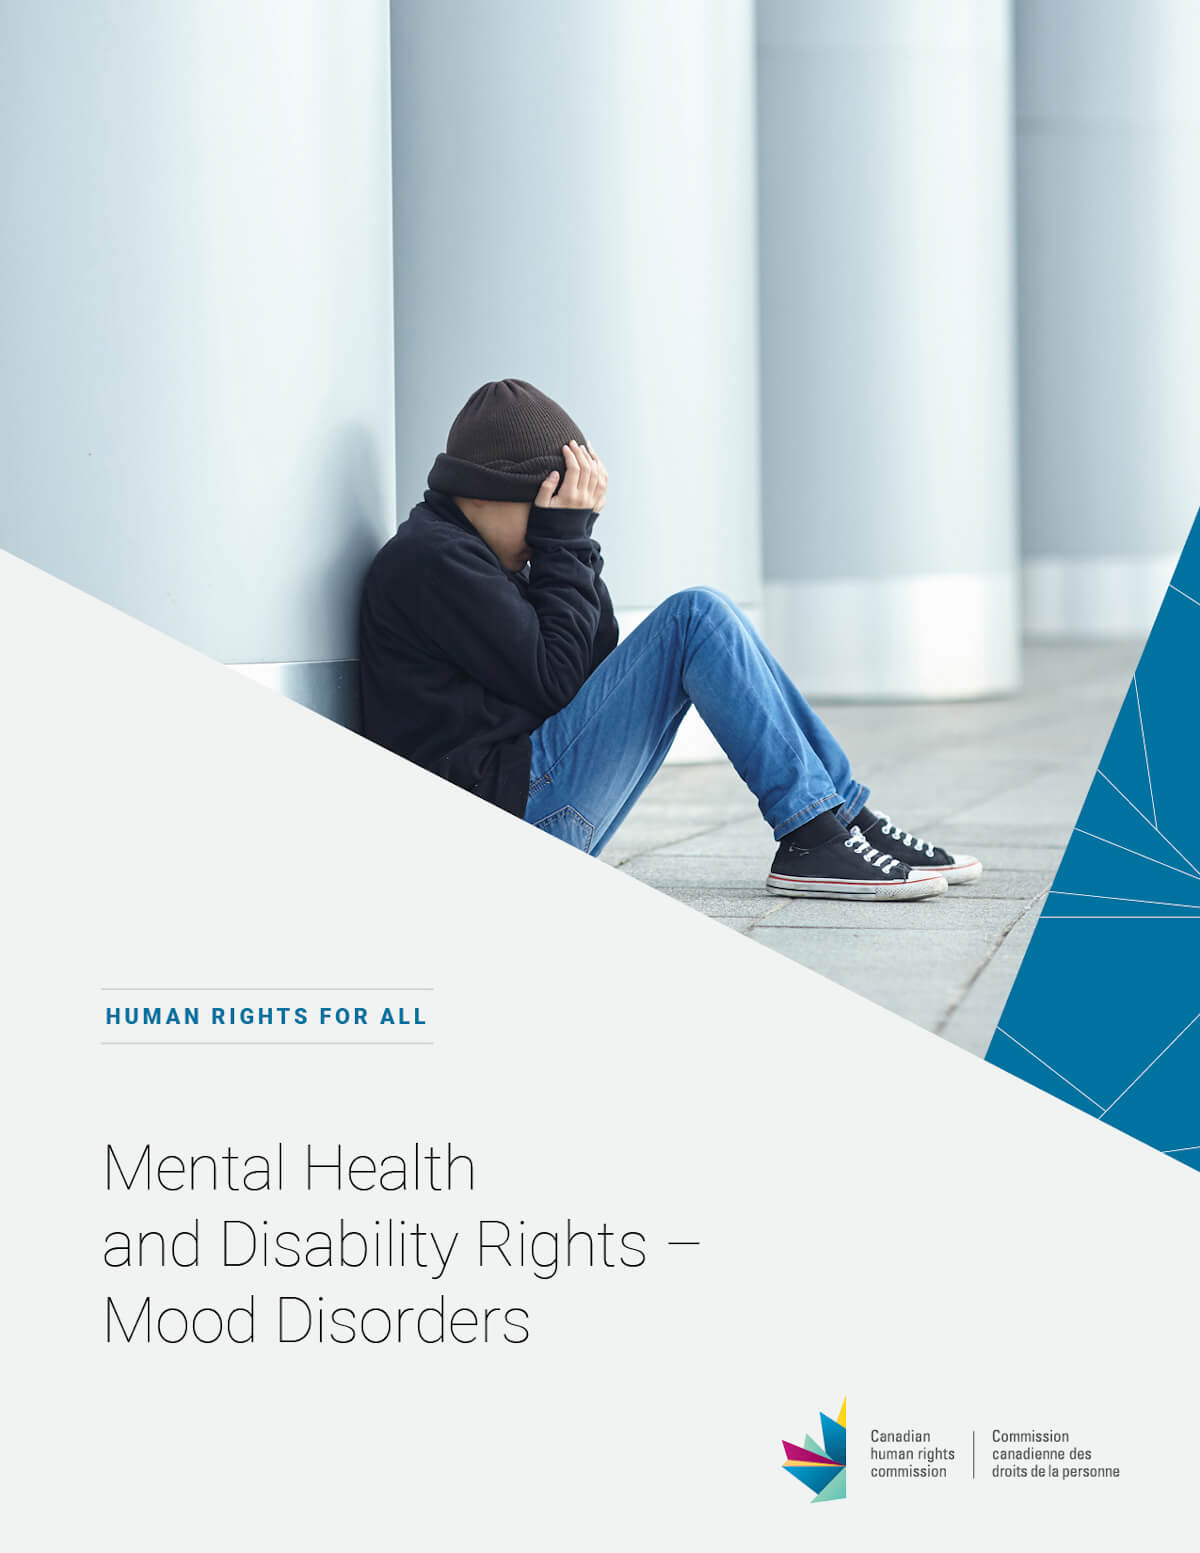 Mental Health and Equality Rights: Mood Disorders - An analysis using the 2012 Canadian Community Health Survey (CCHS) – Mental Health Component